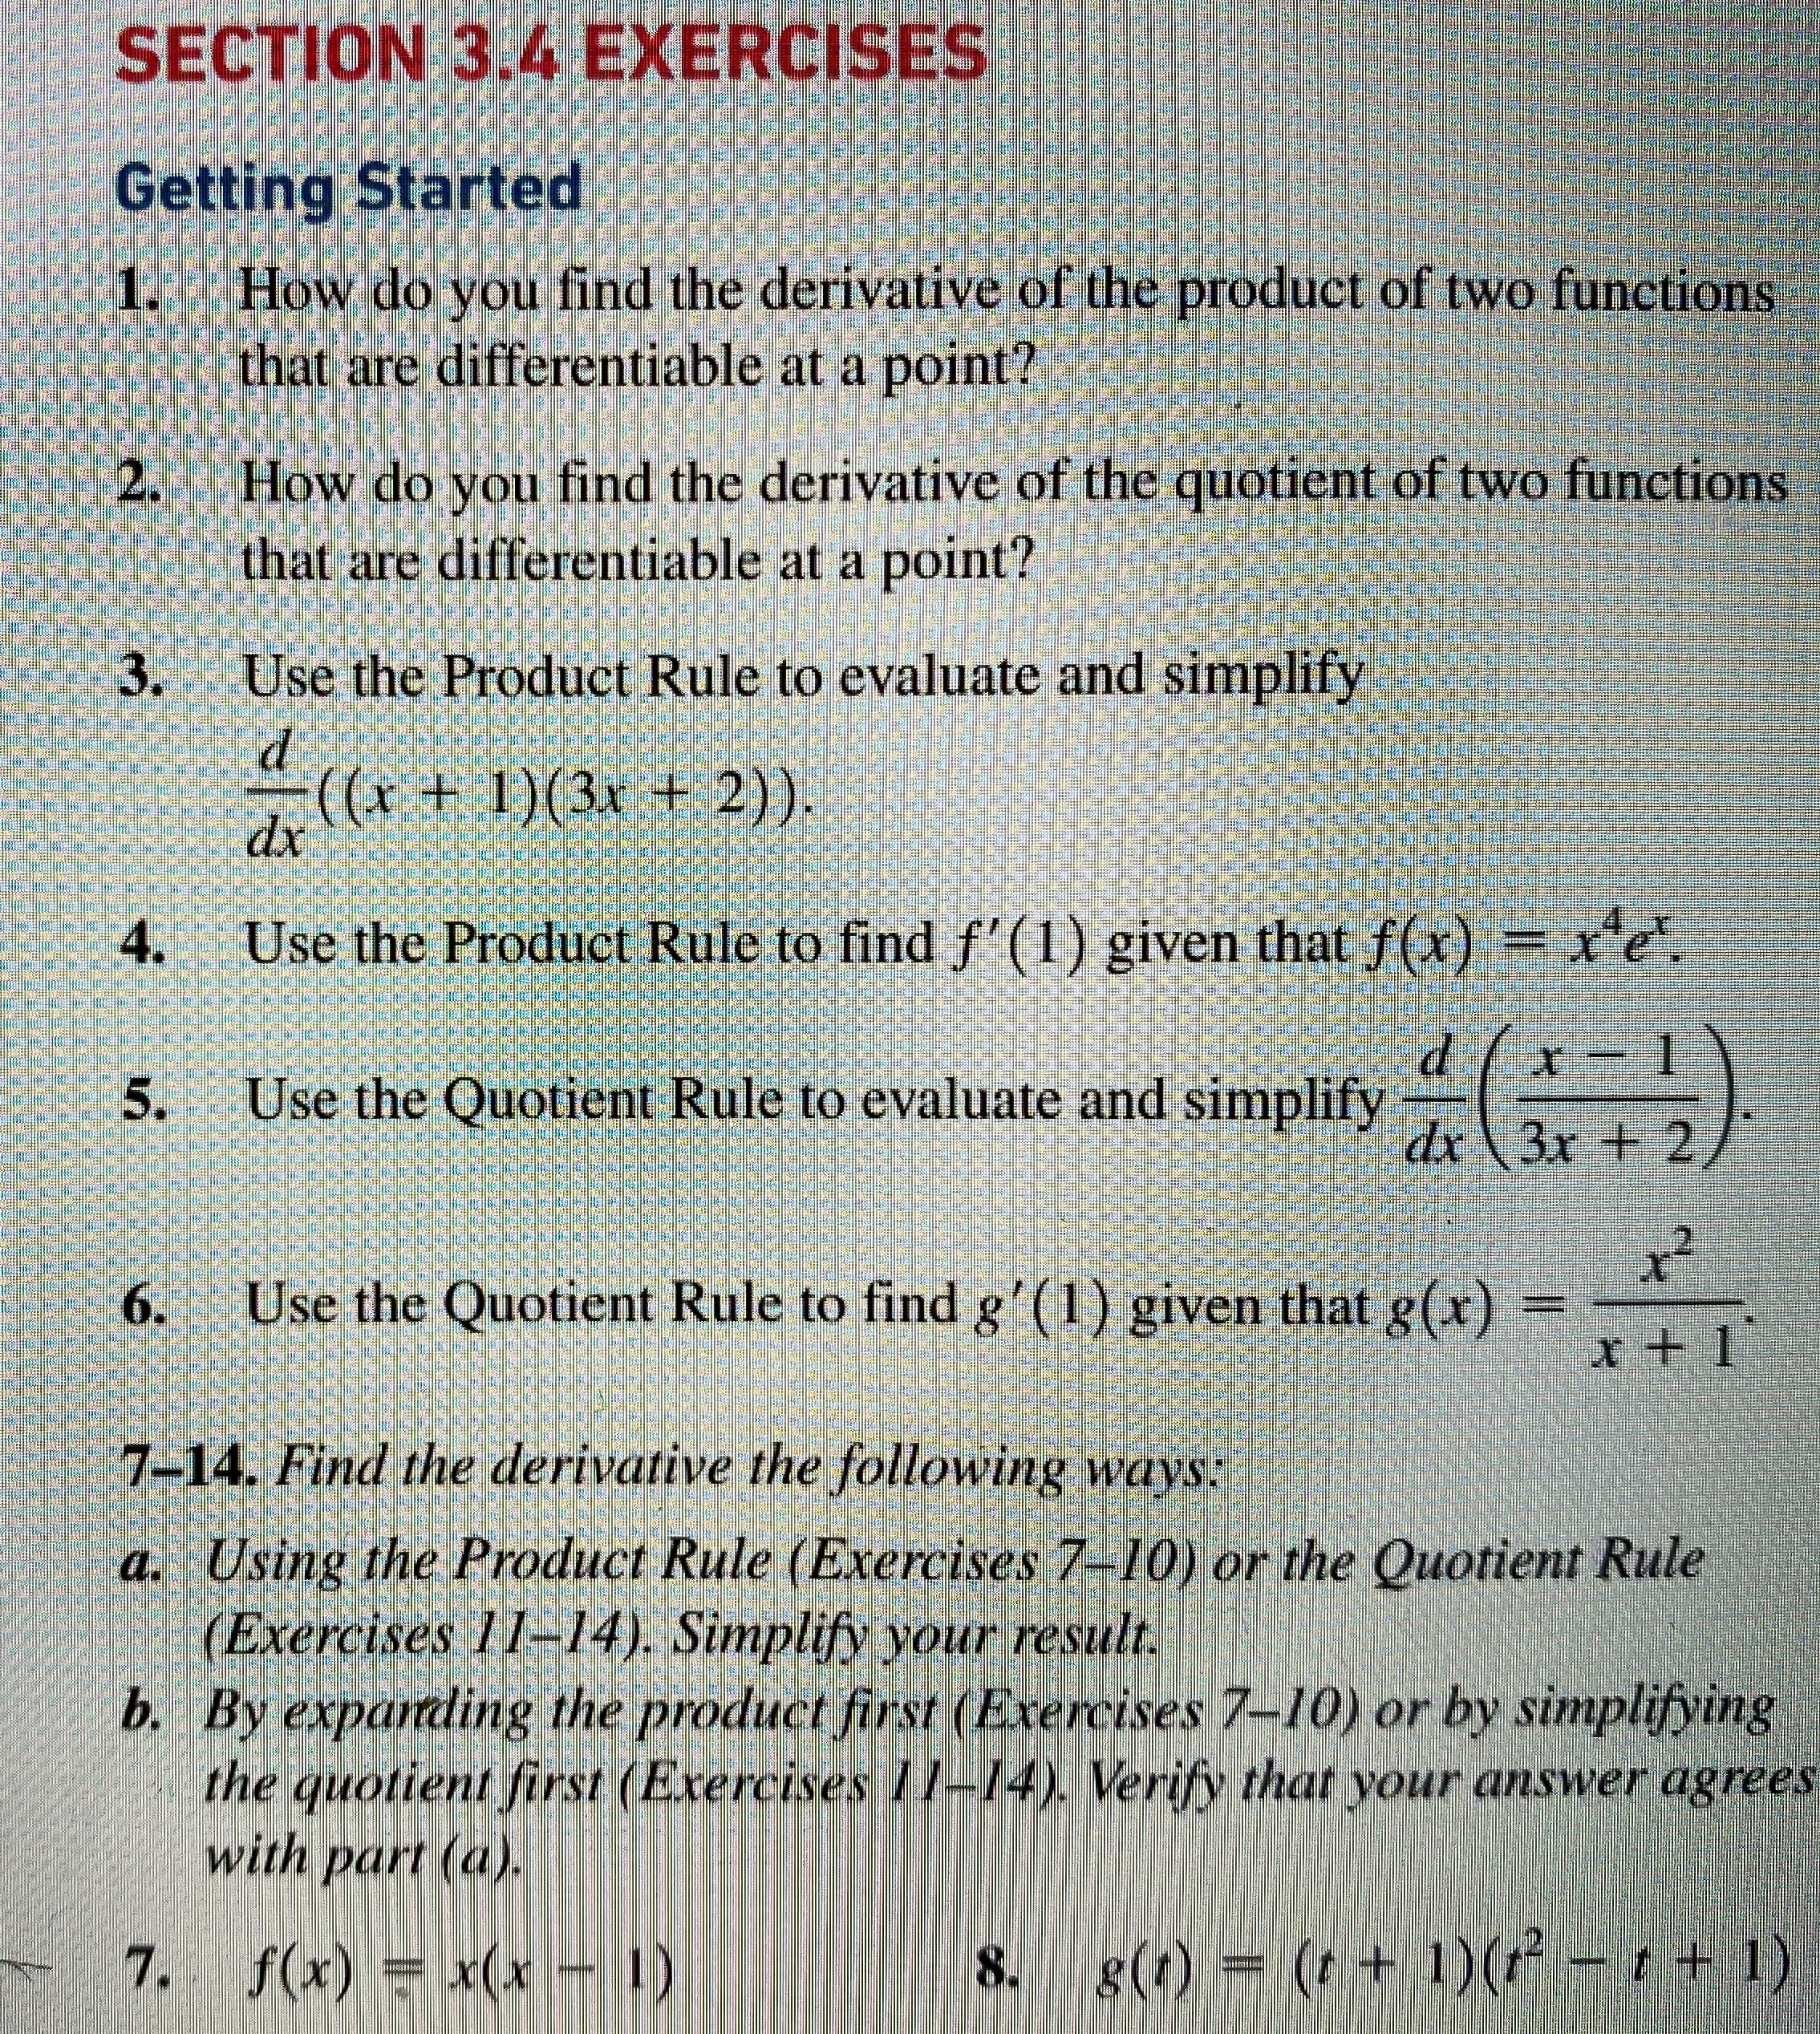 SECTION 3.4 EXERCISES
Getting Started
1.
How do you find the derivative of the product of two funetions
that are differentiable at a point?
2.
How do you find the derivative of the quotient of two functions
that are differentiable at a point?
3.
Use the Product Rule to evaluate and simplify
((x + 1)(3x + 2)).
4.
Use the Product Rule to find f'(1) given that f(x) = re
d( x
5.
Use the Quotient Rule to evaluate and simplify
dx 3x + 2/
6.
Use the Quotient Rule to find g'(1) given that g(x)
7-14. Find the derivative the following ways:
a. Using the Product Rule (Exercises 7-10) or the Quotient Rule
(Exercises 11-14). Simplify your result.
b. By exparding the product first (Exercises 7-10) or by simplifying
the quotient first (Erercises 7/-14). Verify that your answer agrees
with part (a).
7. f(x) x(x 1)
8. g(1) = (t + 1)( – t + 1)
